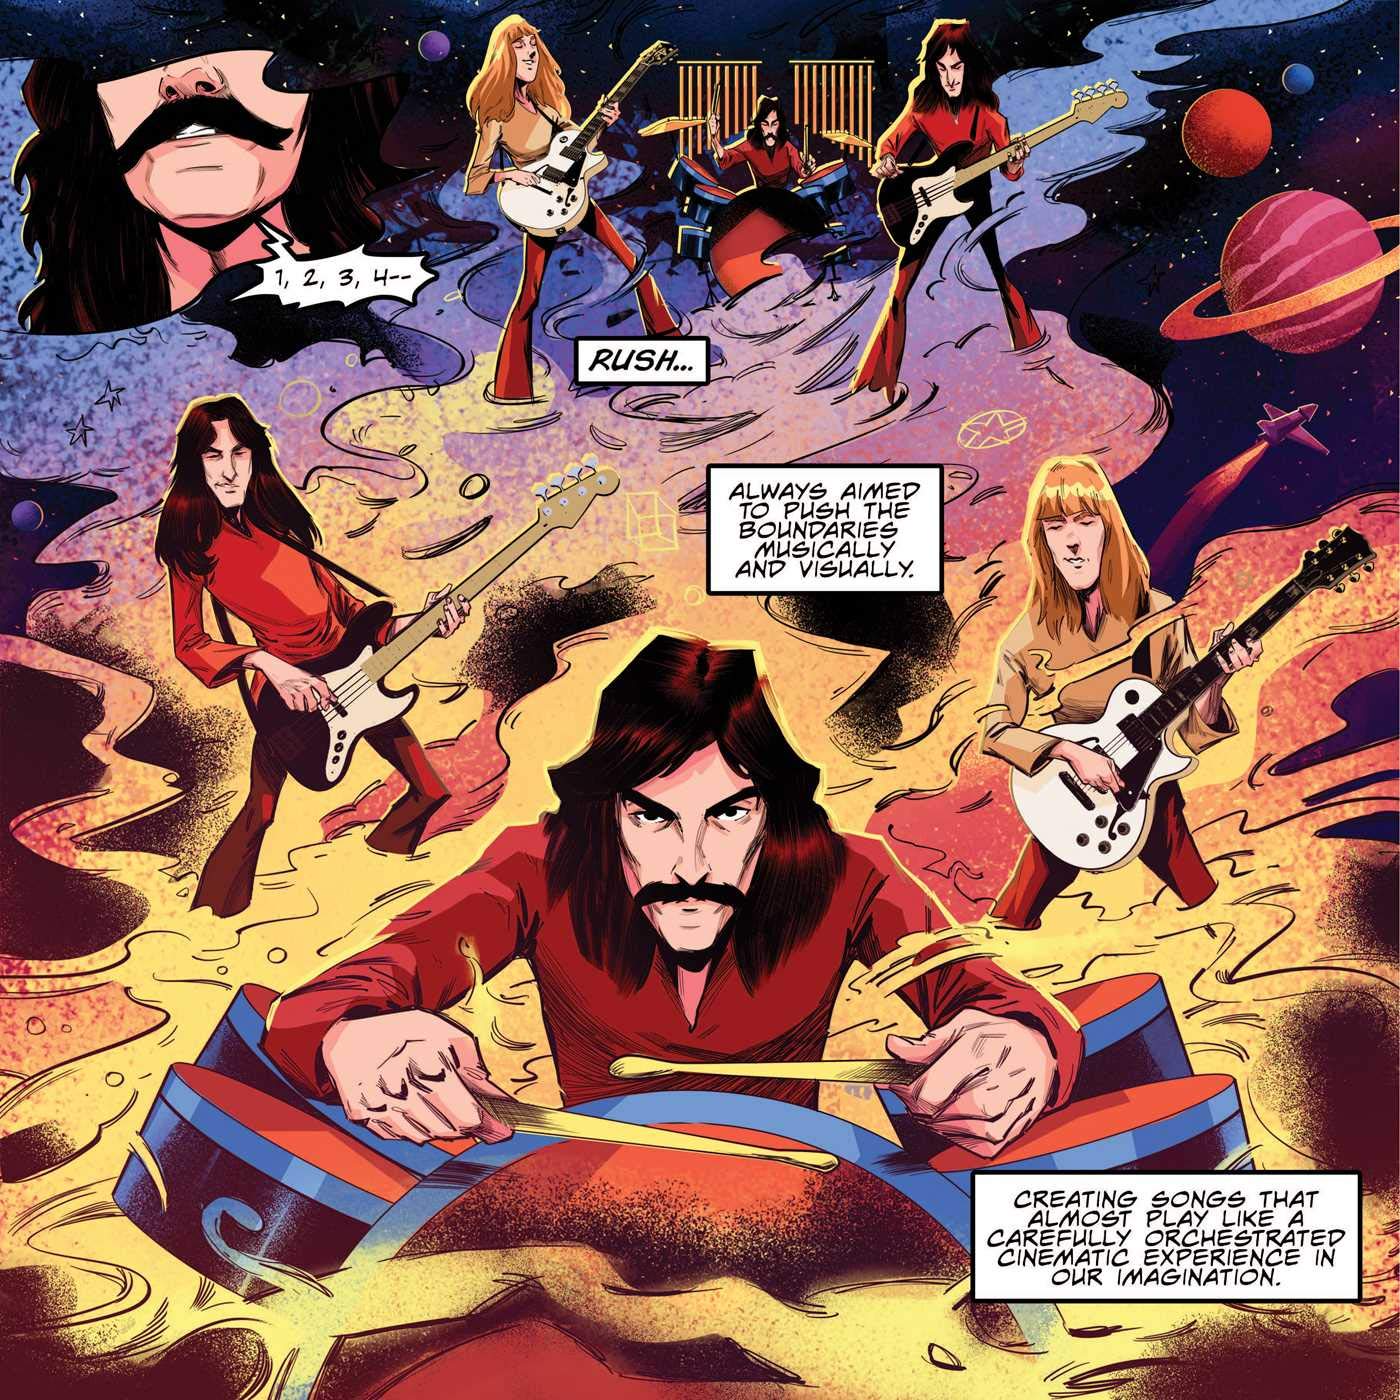 Rush: The Making of A Farewell to Kings: The Graphic Novel